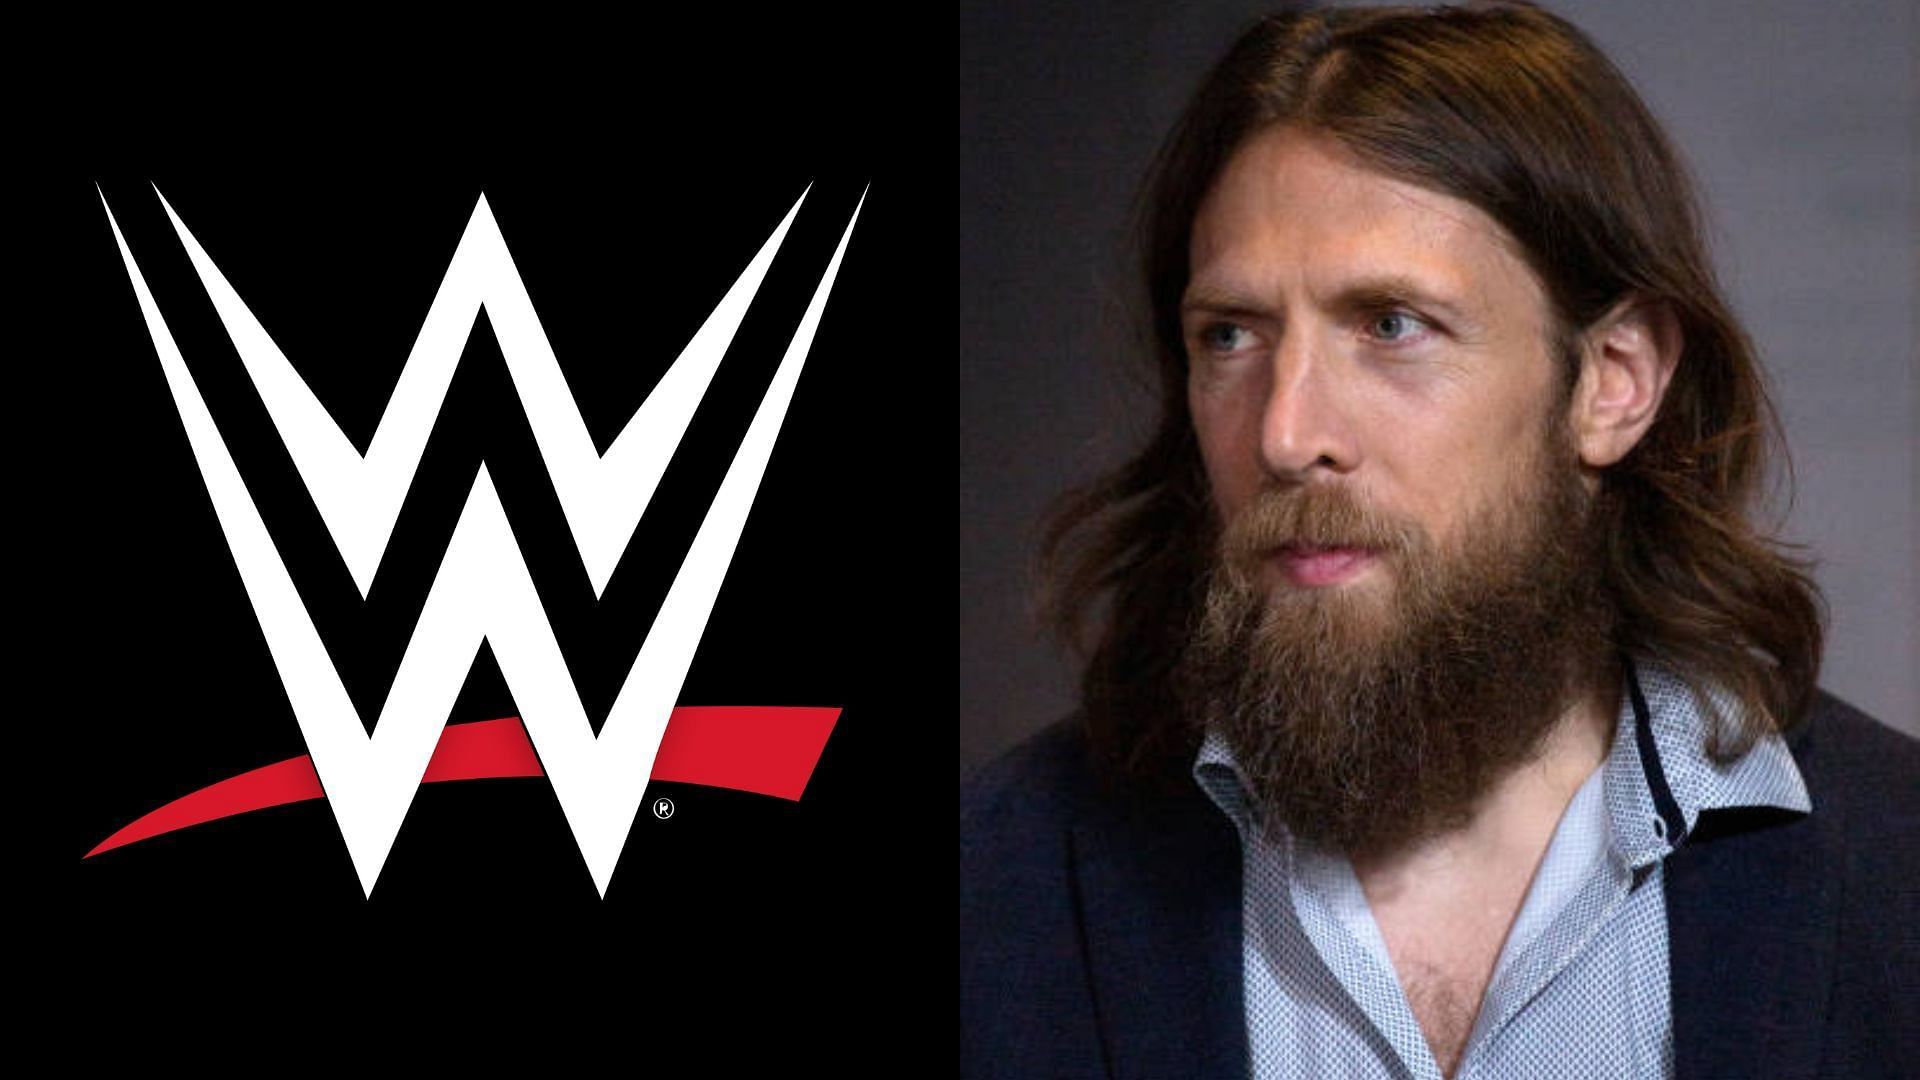 Bryan Danielson is currently signed to All Elite Wrestling